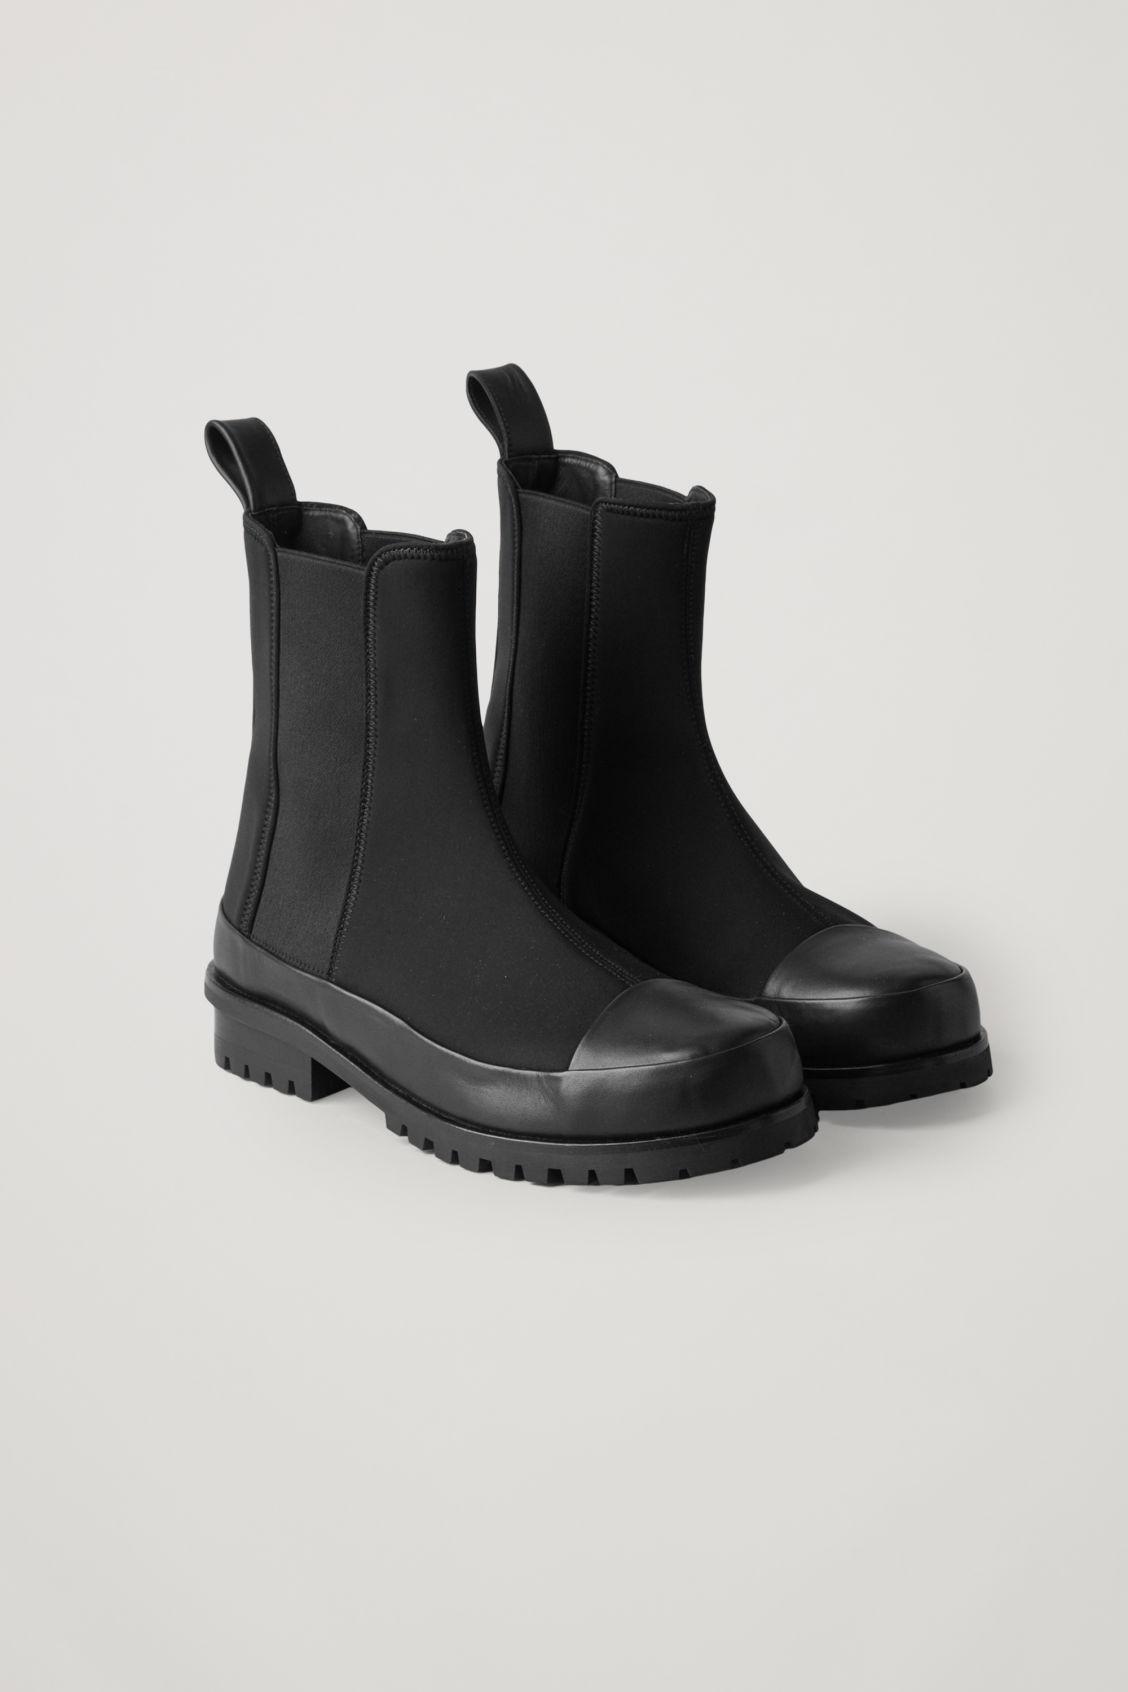 COS Leather Scuba Chelsea Boots in Black for Men - Lyst